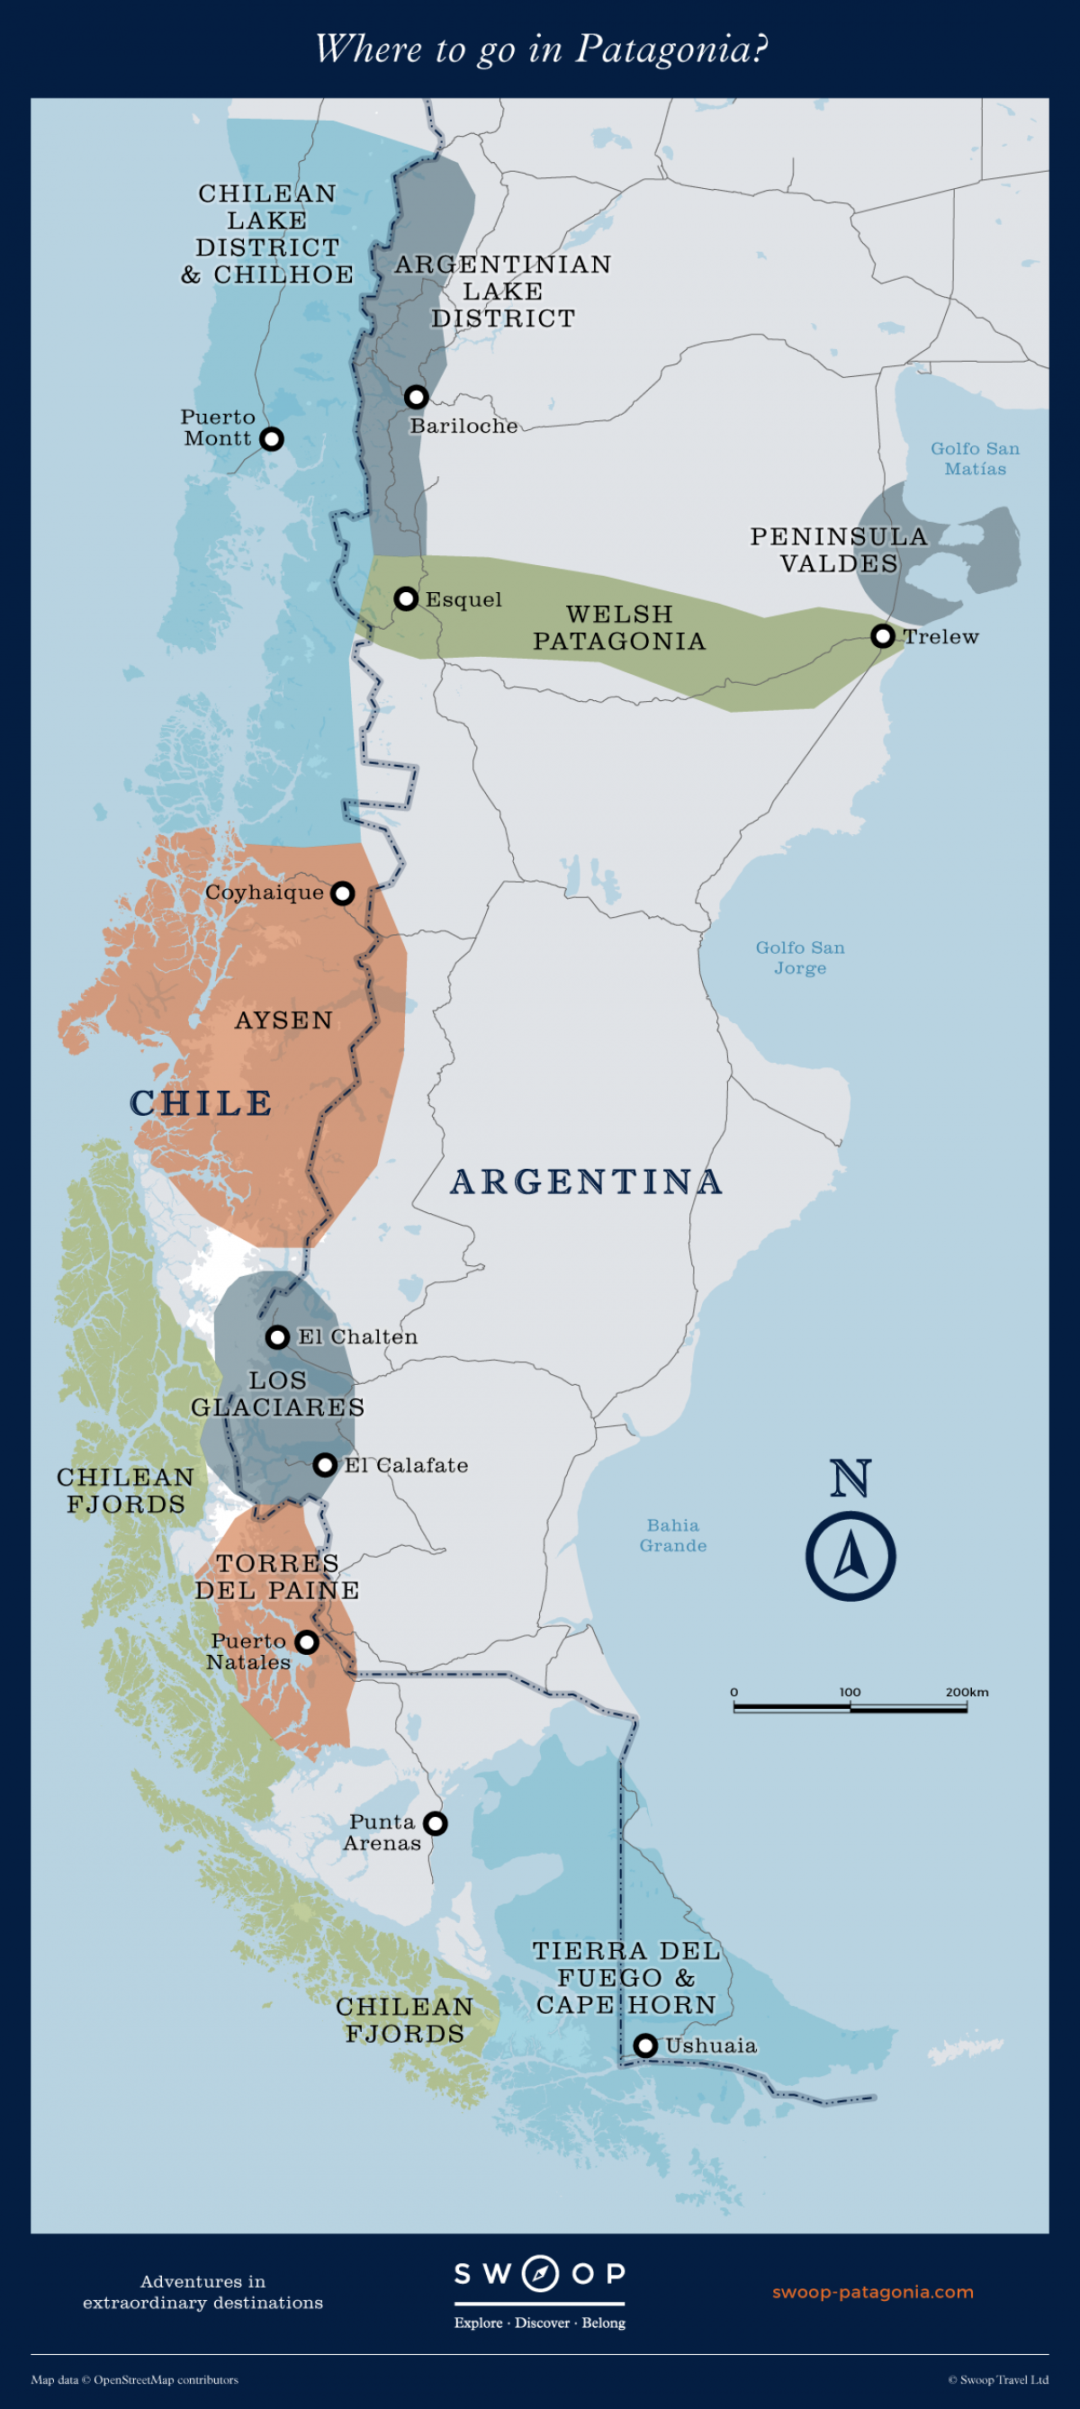 Patagonia Regions Wow Travel Small Group Travel